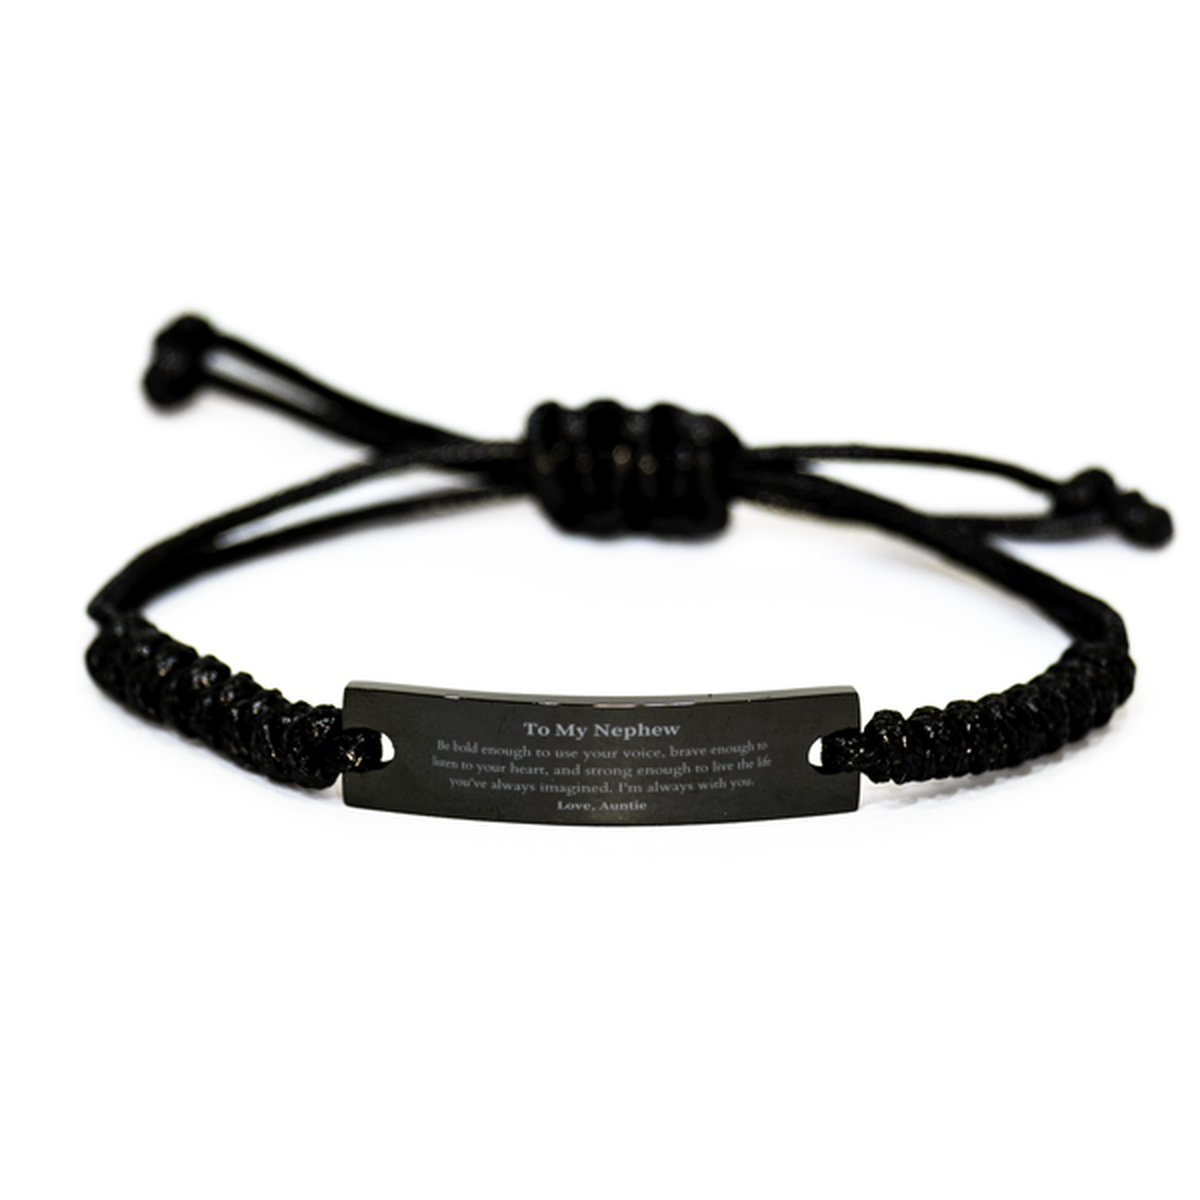 Keepsake Nephew Black Rope Bracelet Gift Idea Graduation Christmas Birthday Nephew from Auntie, Nephew Be bold enough to use your voice, brave enough to listen to your heart. Love, Auntie